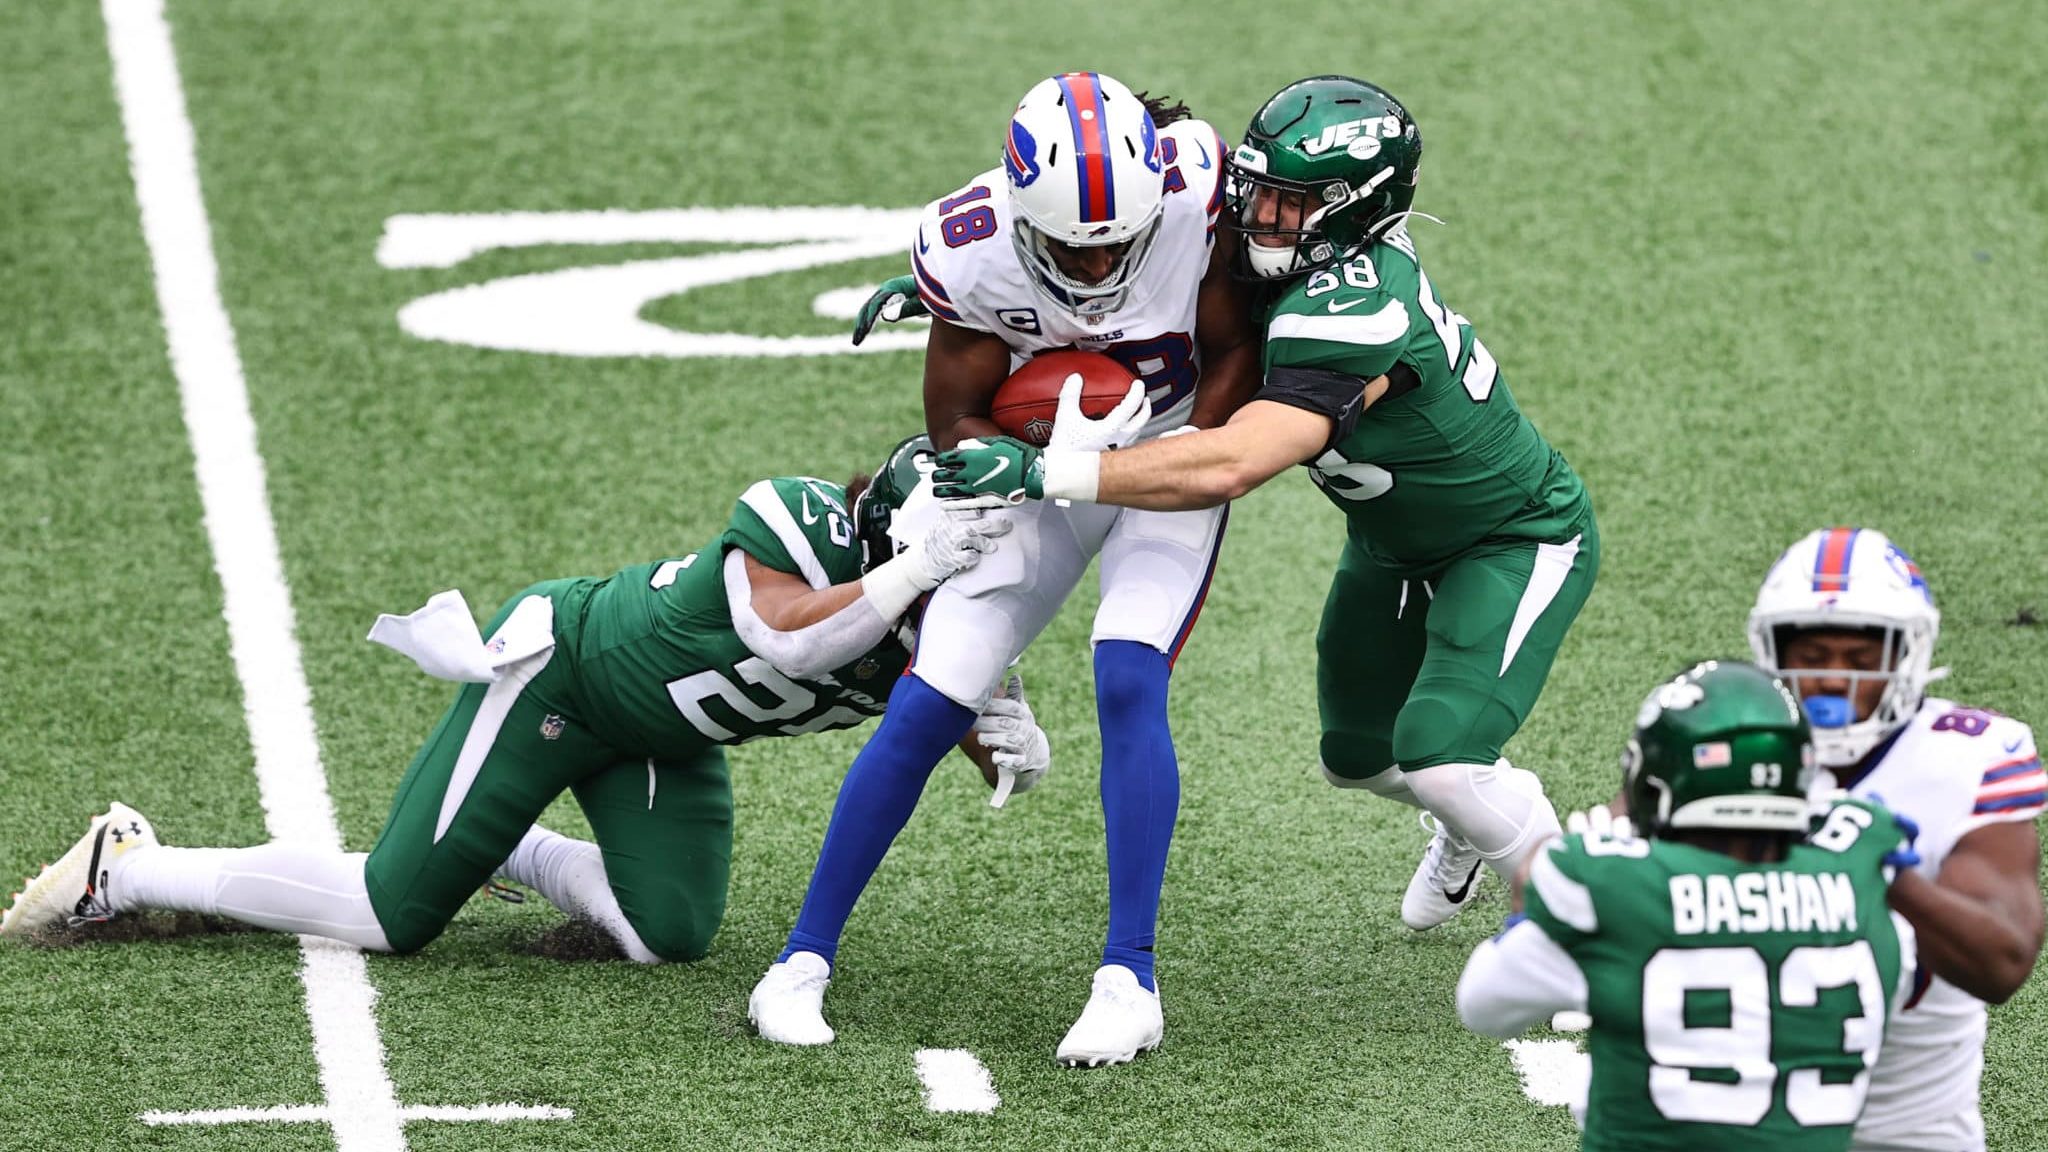 EAST RUTHERFORD, NEW JERSEY - OCTOBER 25: Ty Johnson #25 and Bryce Hager #58 of the New York Jets tackle Andre Roberts #18 of the Buffalo Bills during a kickoff return in the second quarter of the game at MetLife Stadium on October 25, 2020 in East Rutherford, New Jersey.